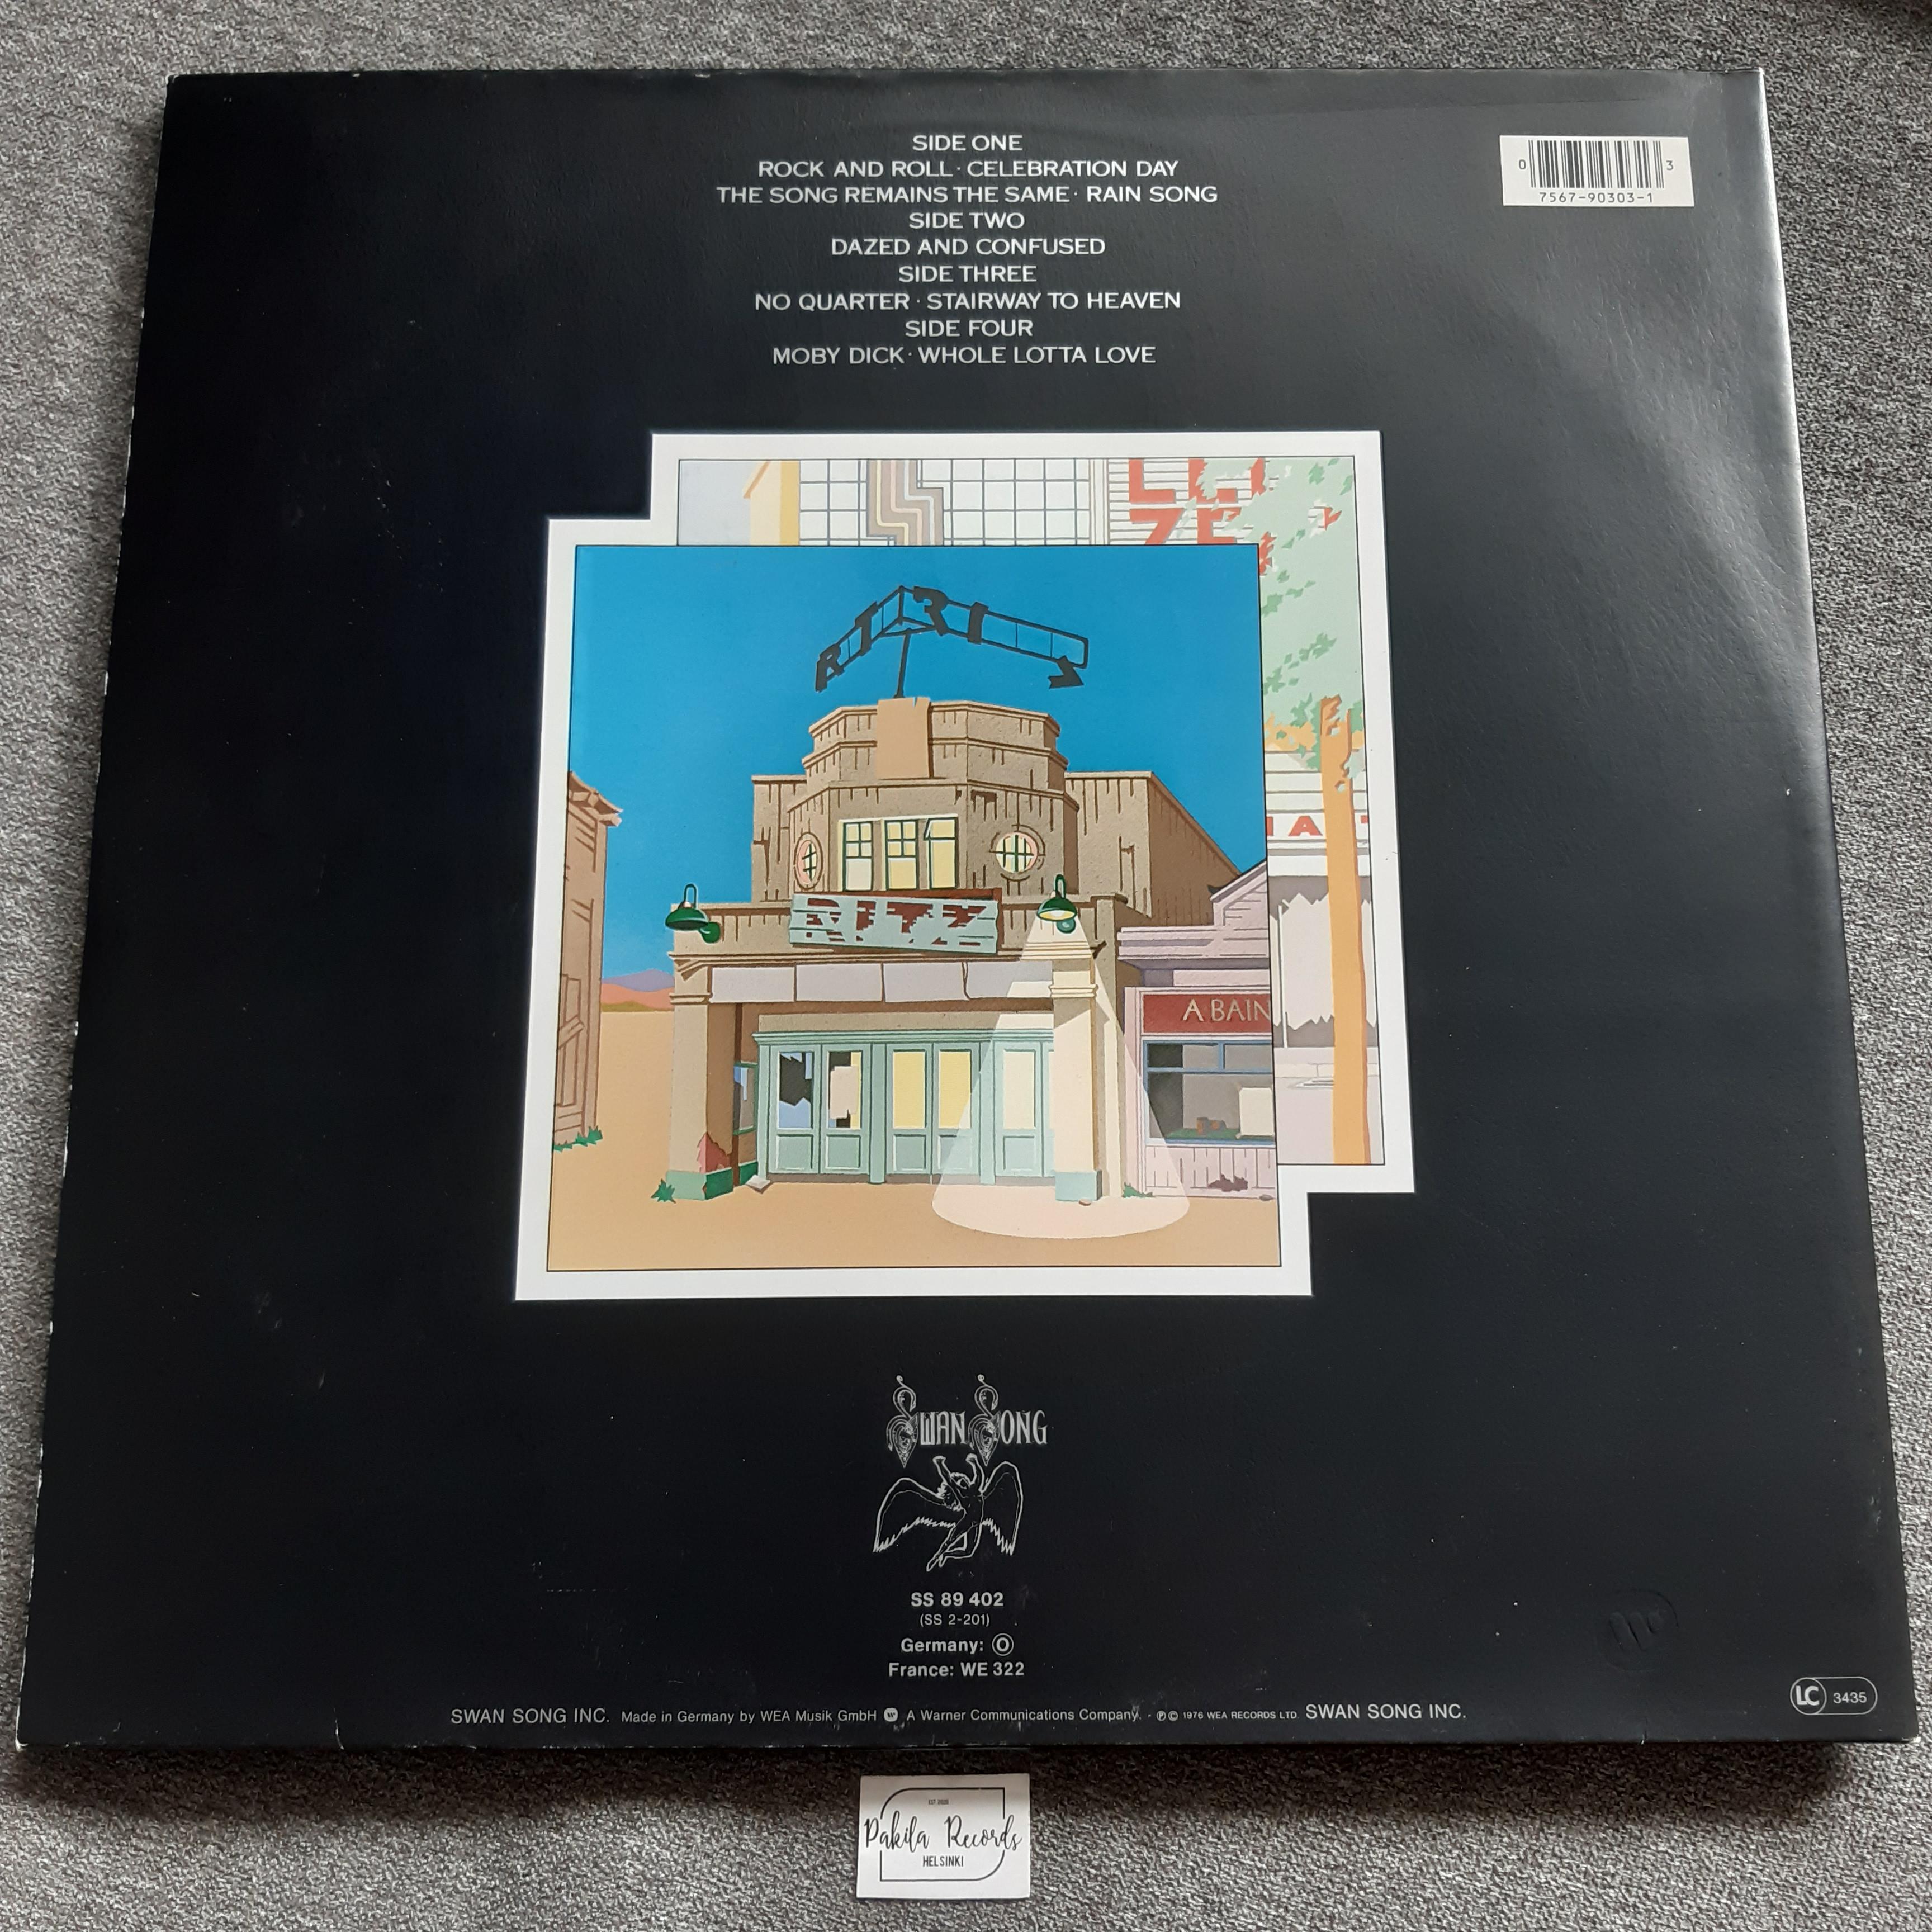 Led Zeppelin - The Soundtrack From The Film The Song Remains The Same - 2 LP (käytetty)